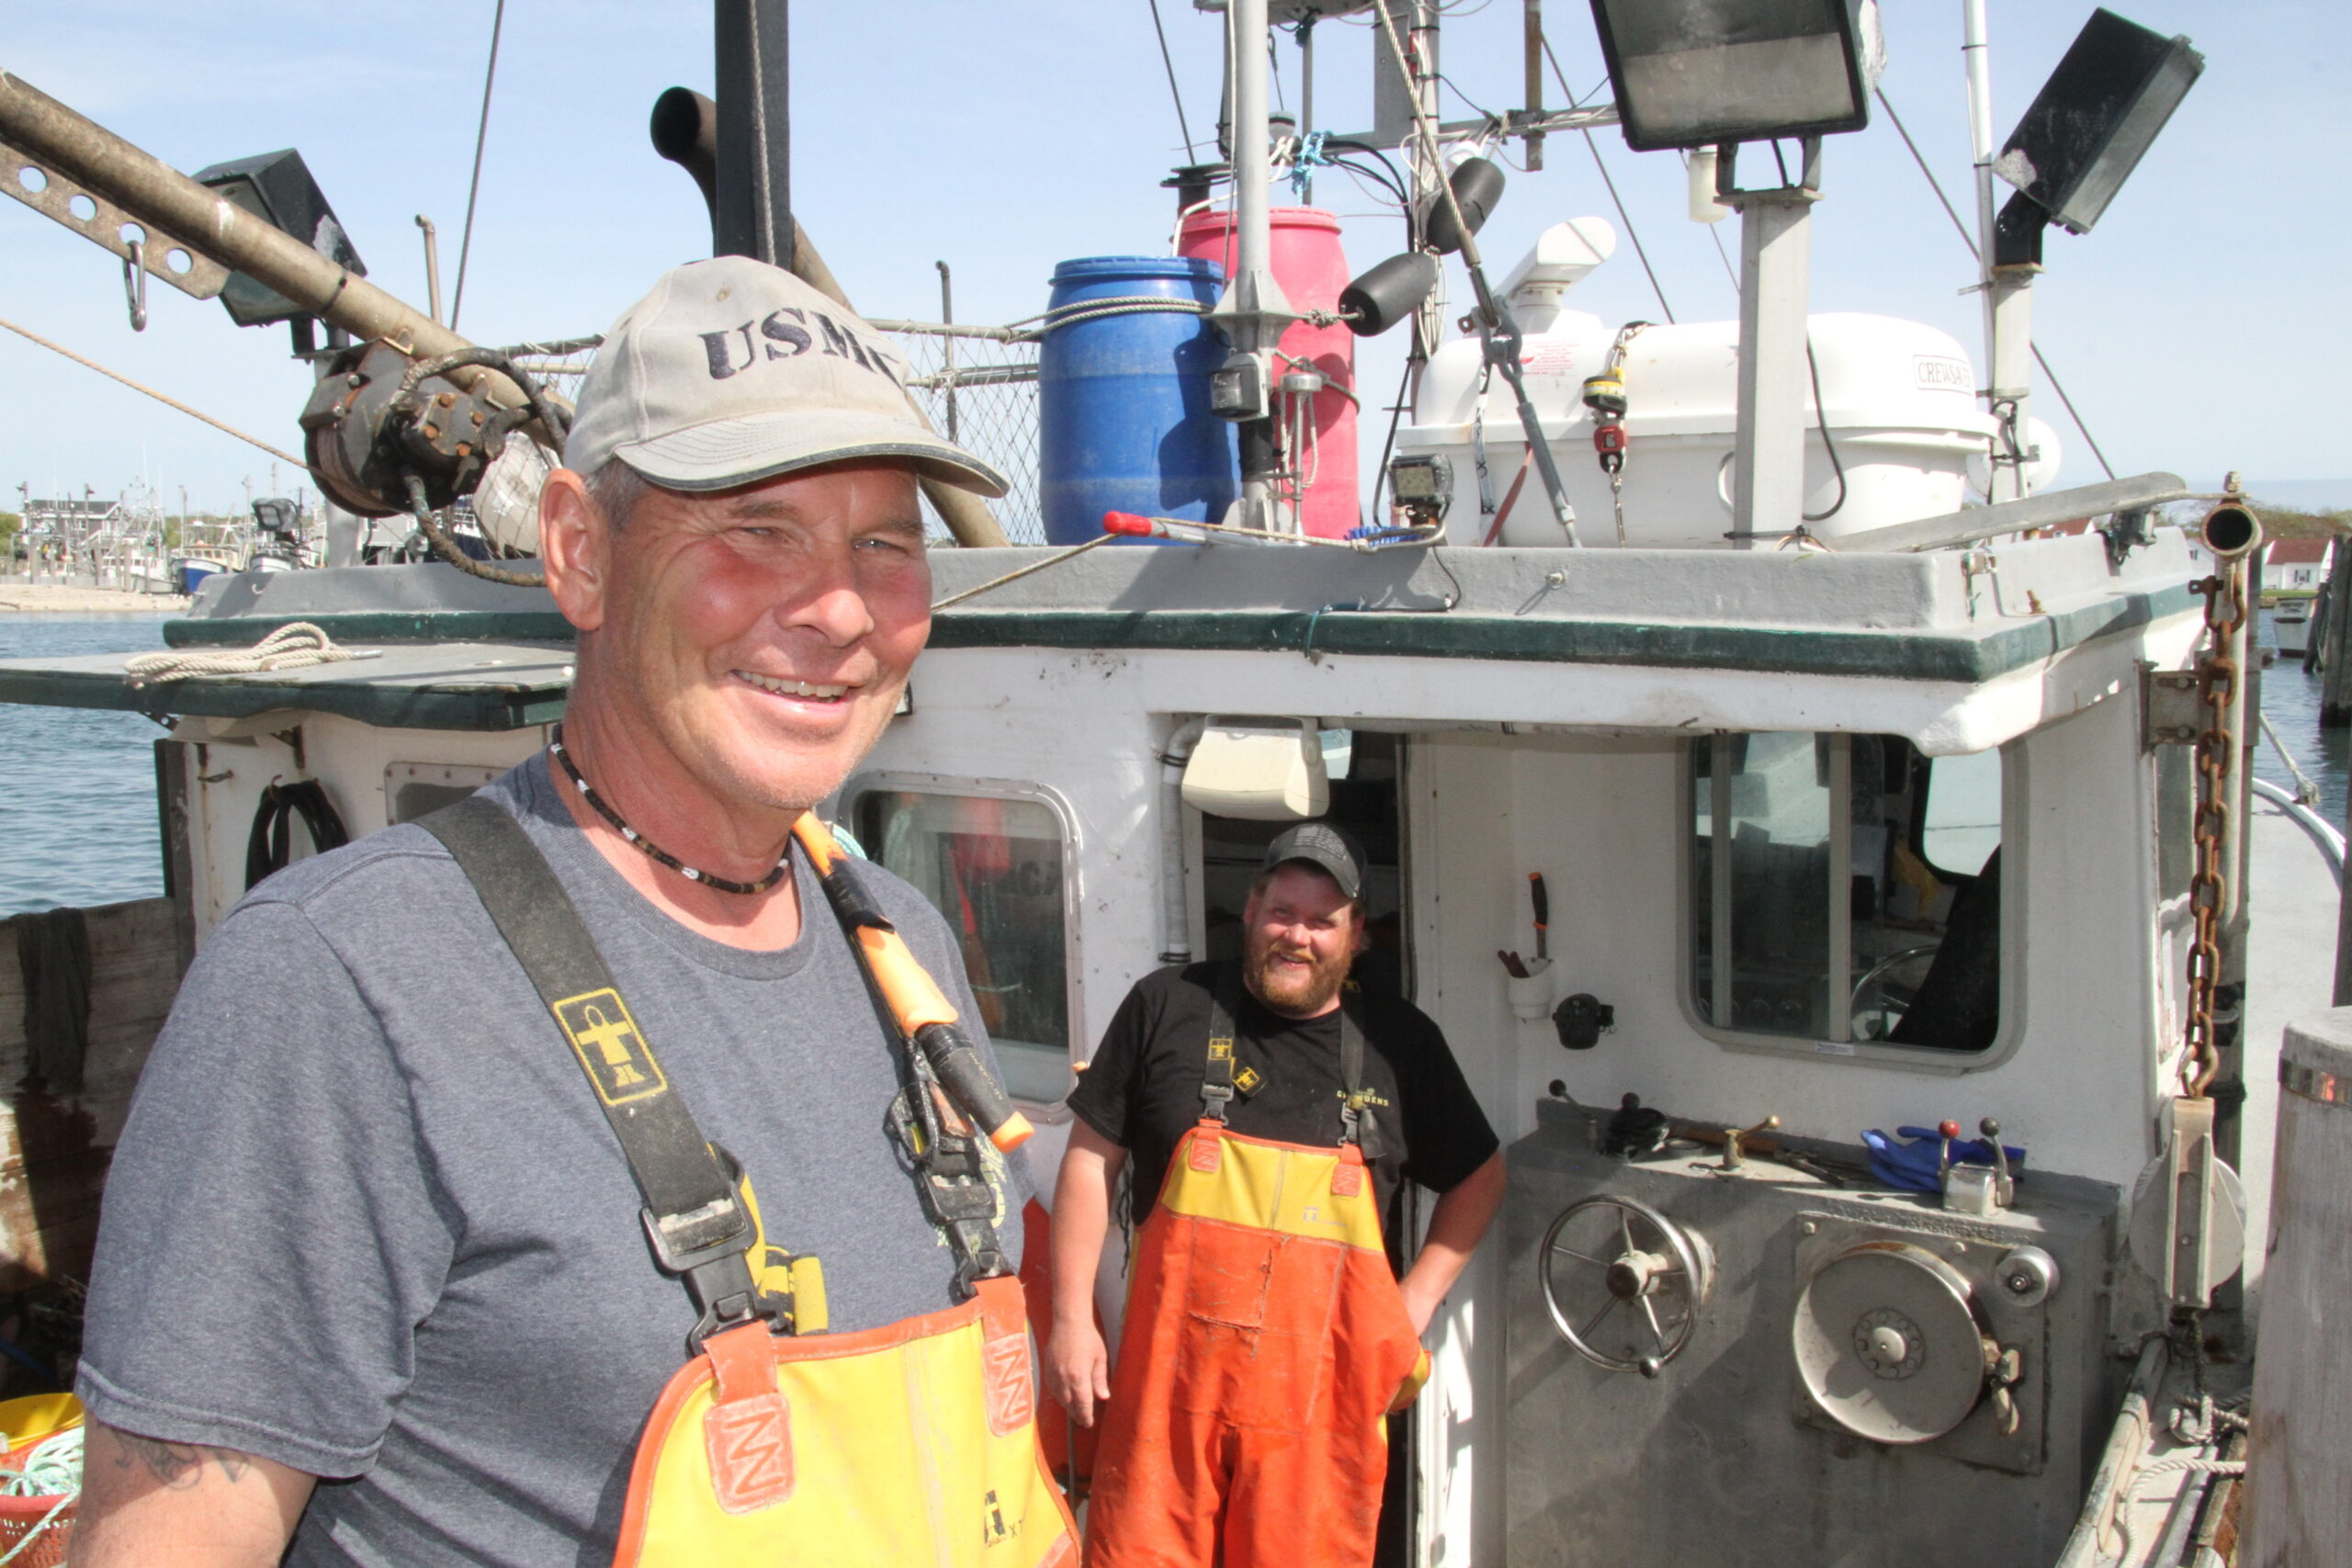 Al Schaffer and Tanner run one of the few full-time lobster fishing boats remaining in Montauk.